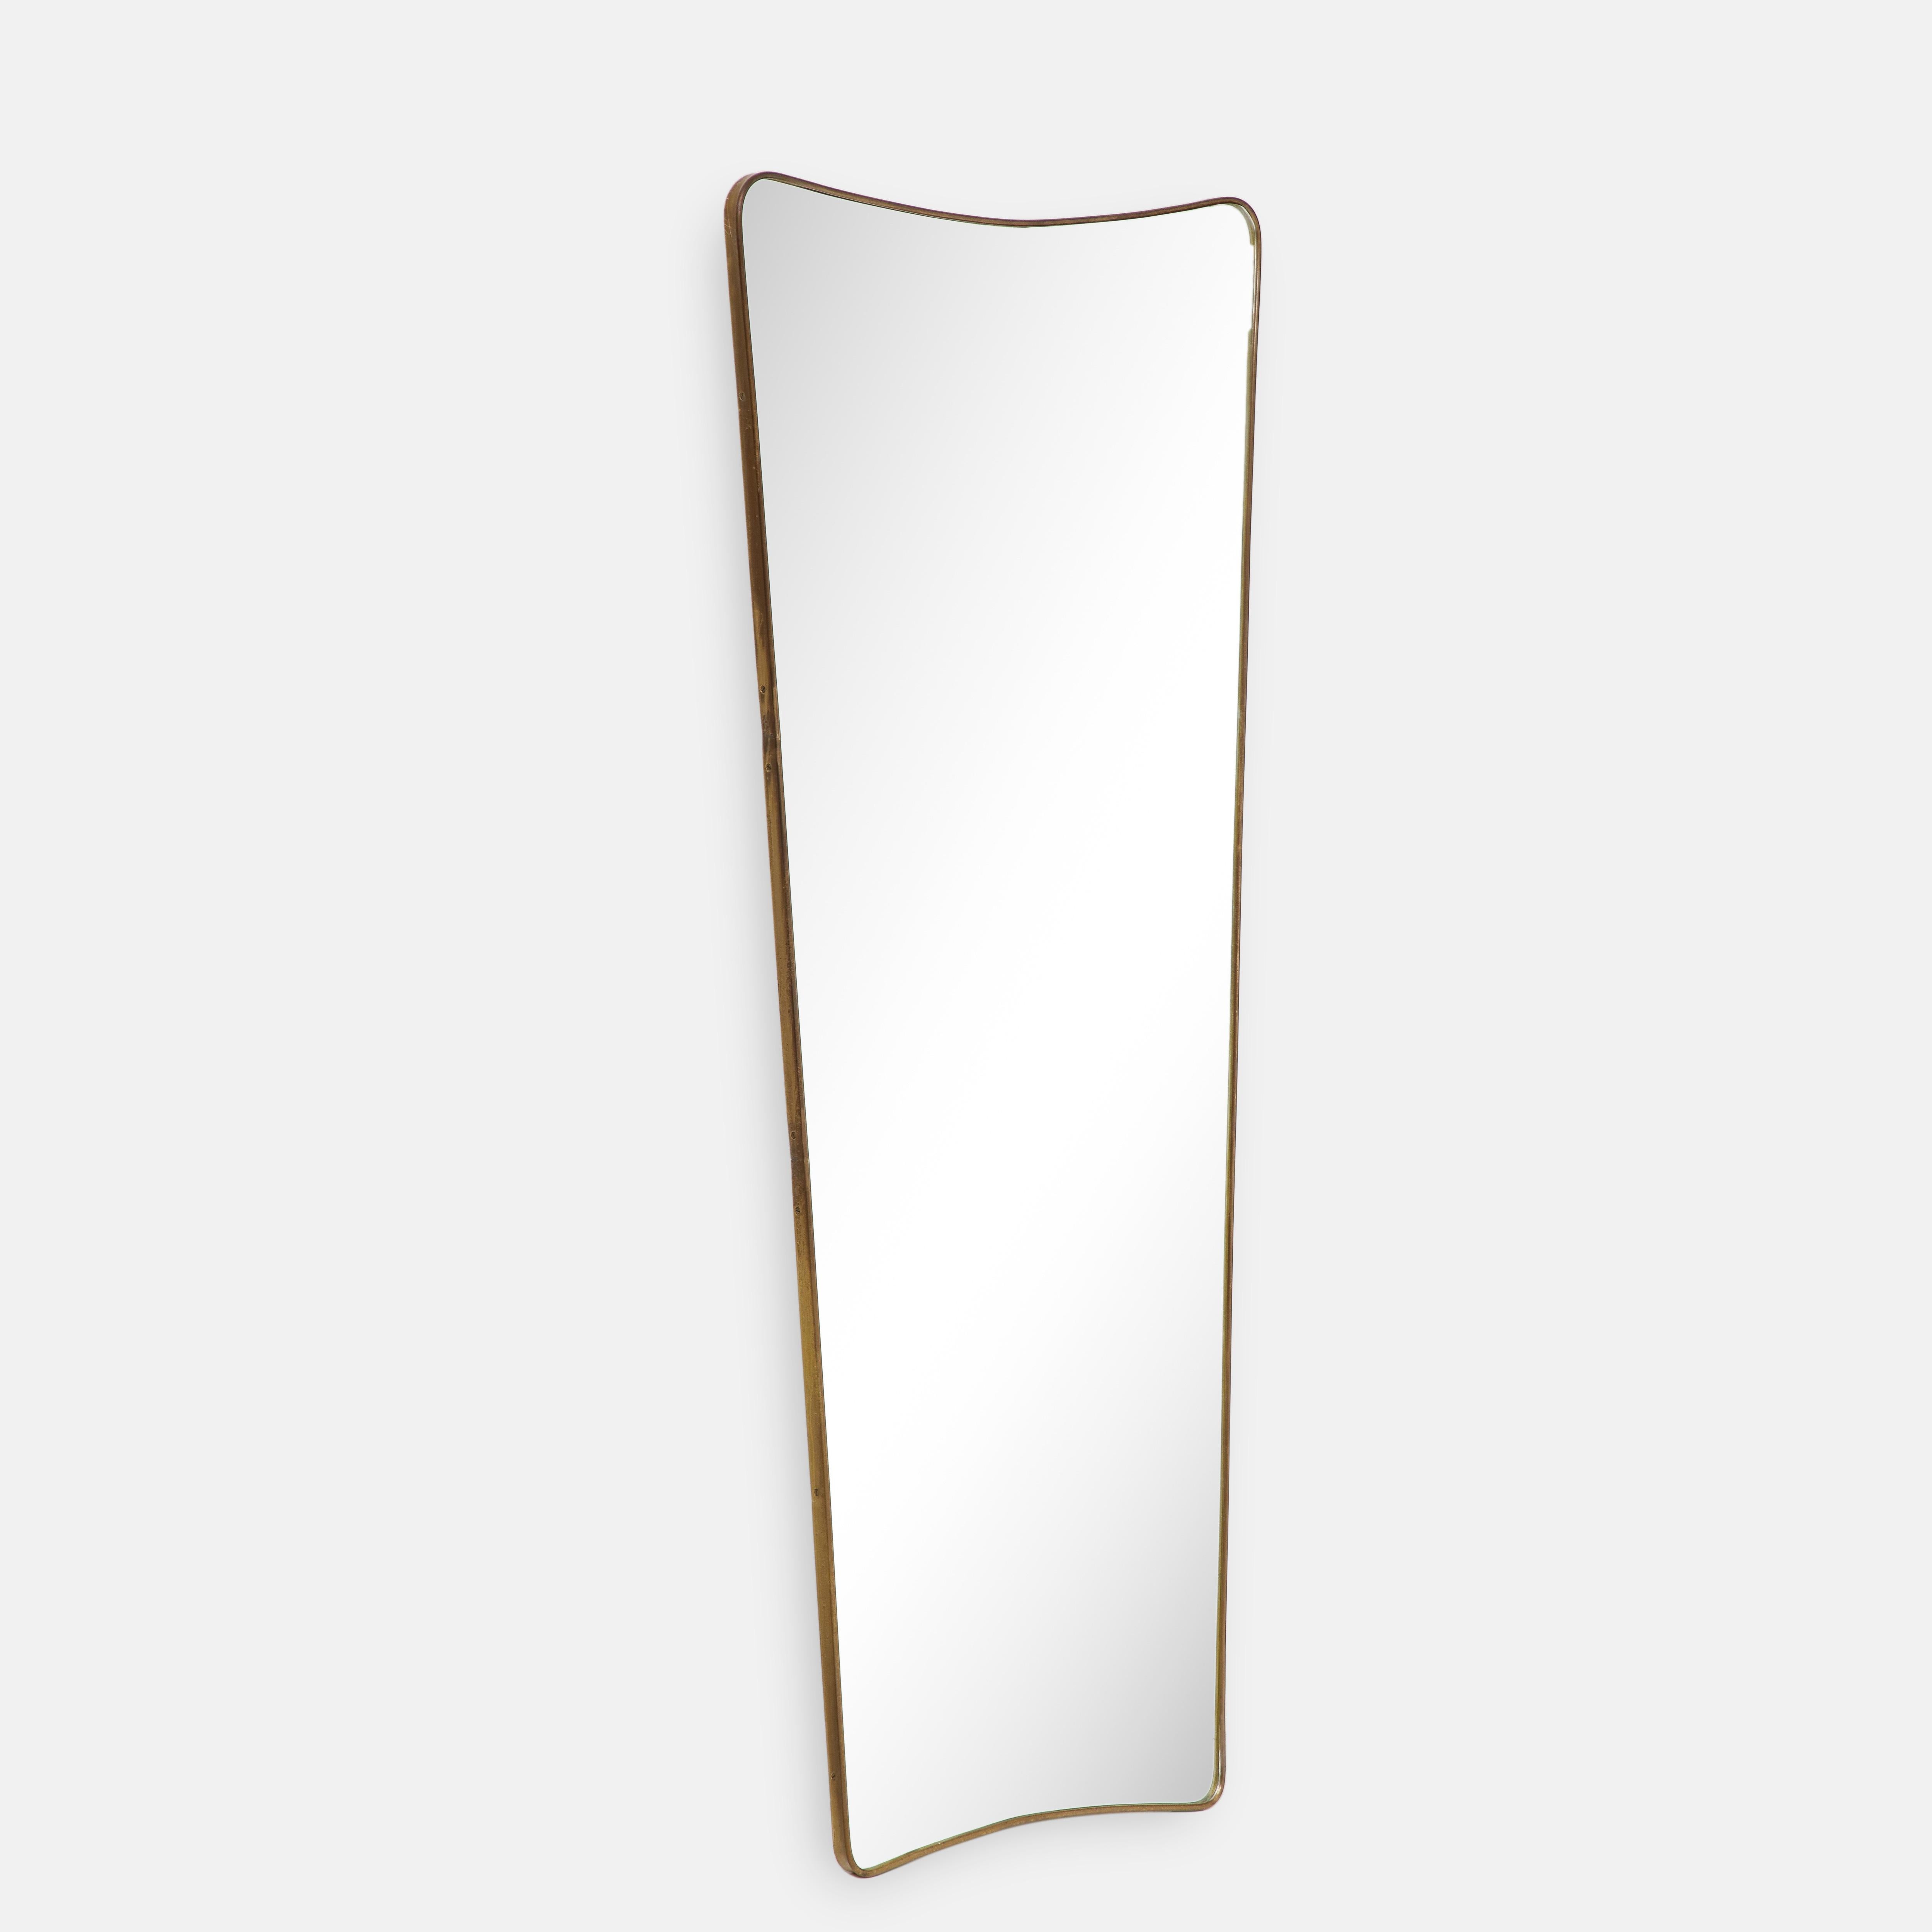 Mid-20th Century 1950s Italian Modernist Pair of Grand Scale Brass Wall Mirrors For Sale